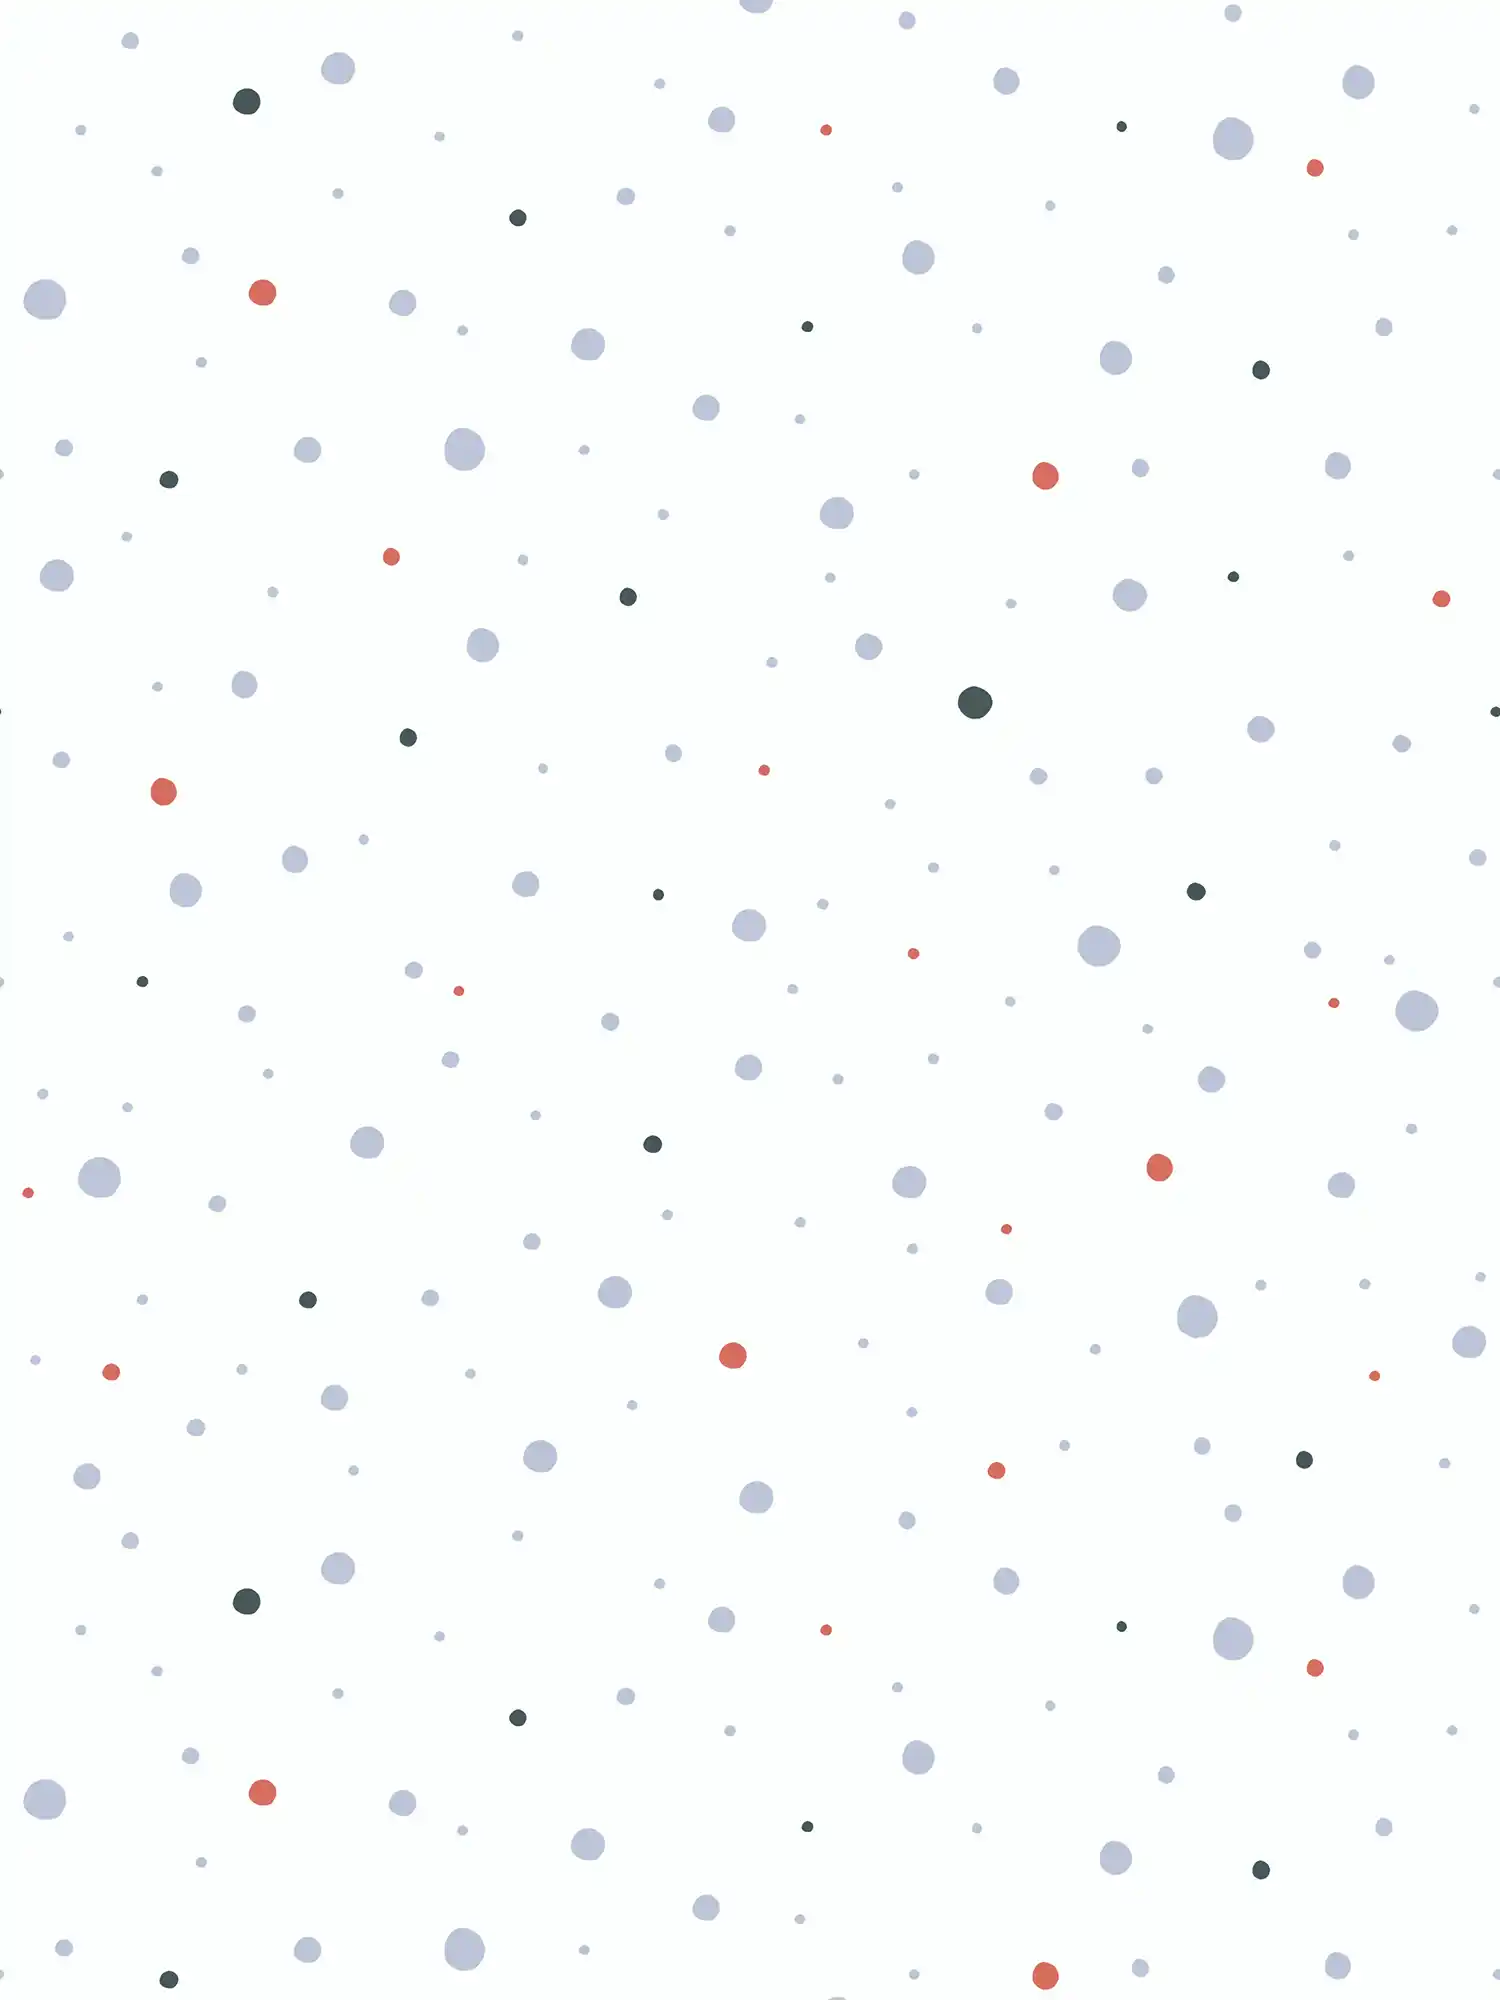         Neutral nursery wallpaper with dots - white, grey, red
    